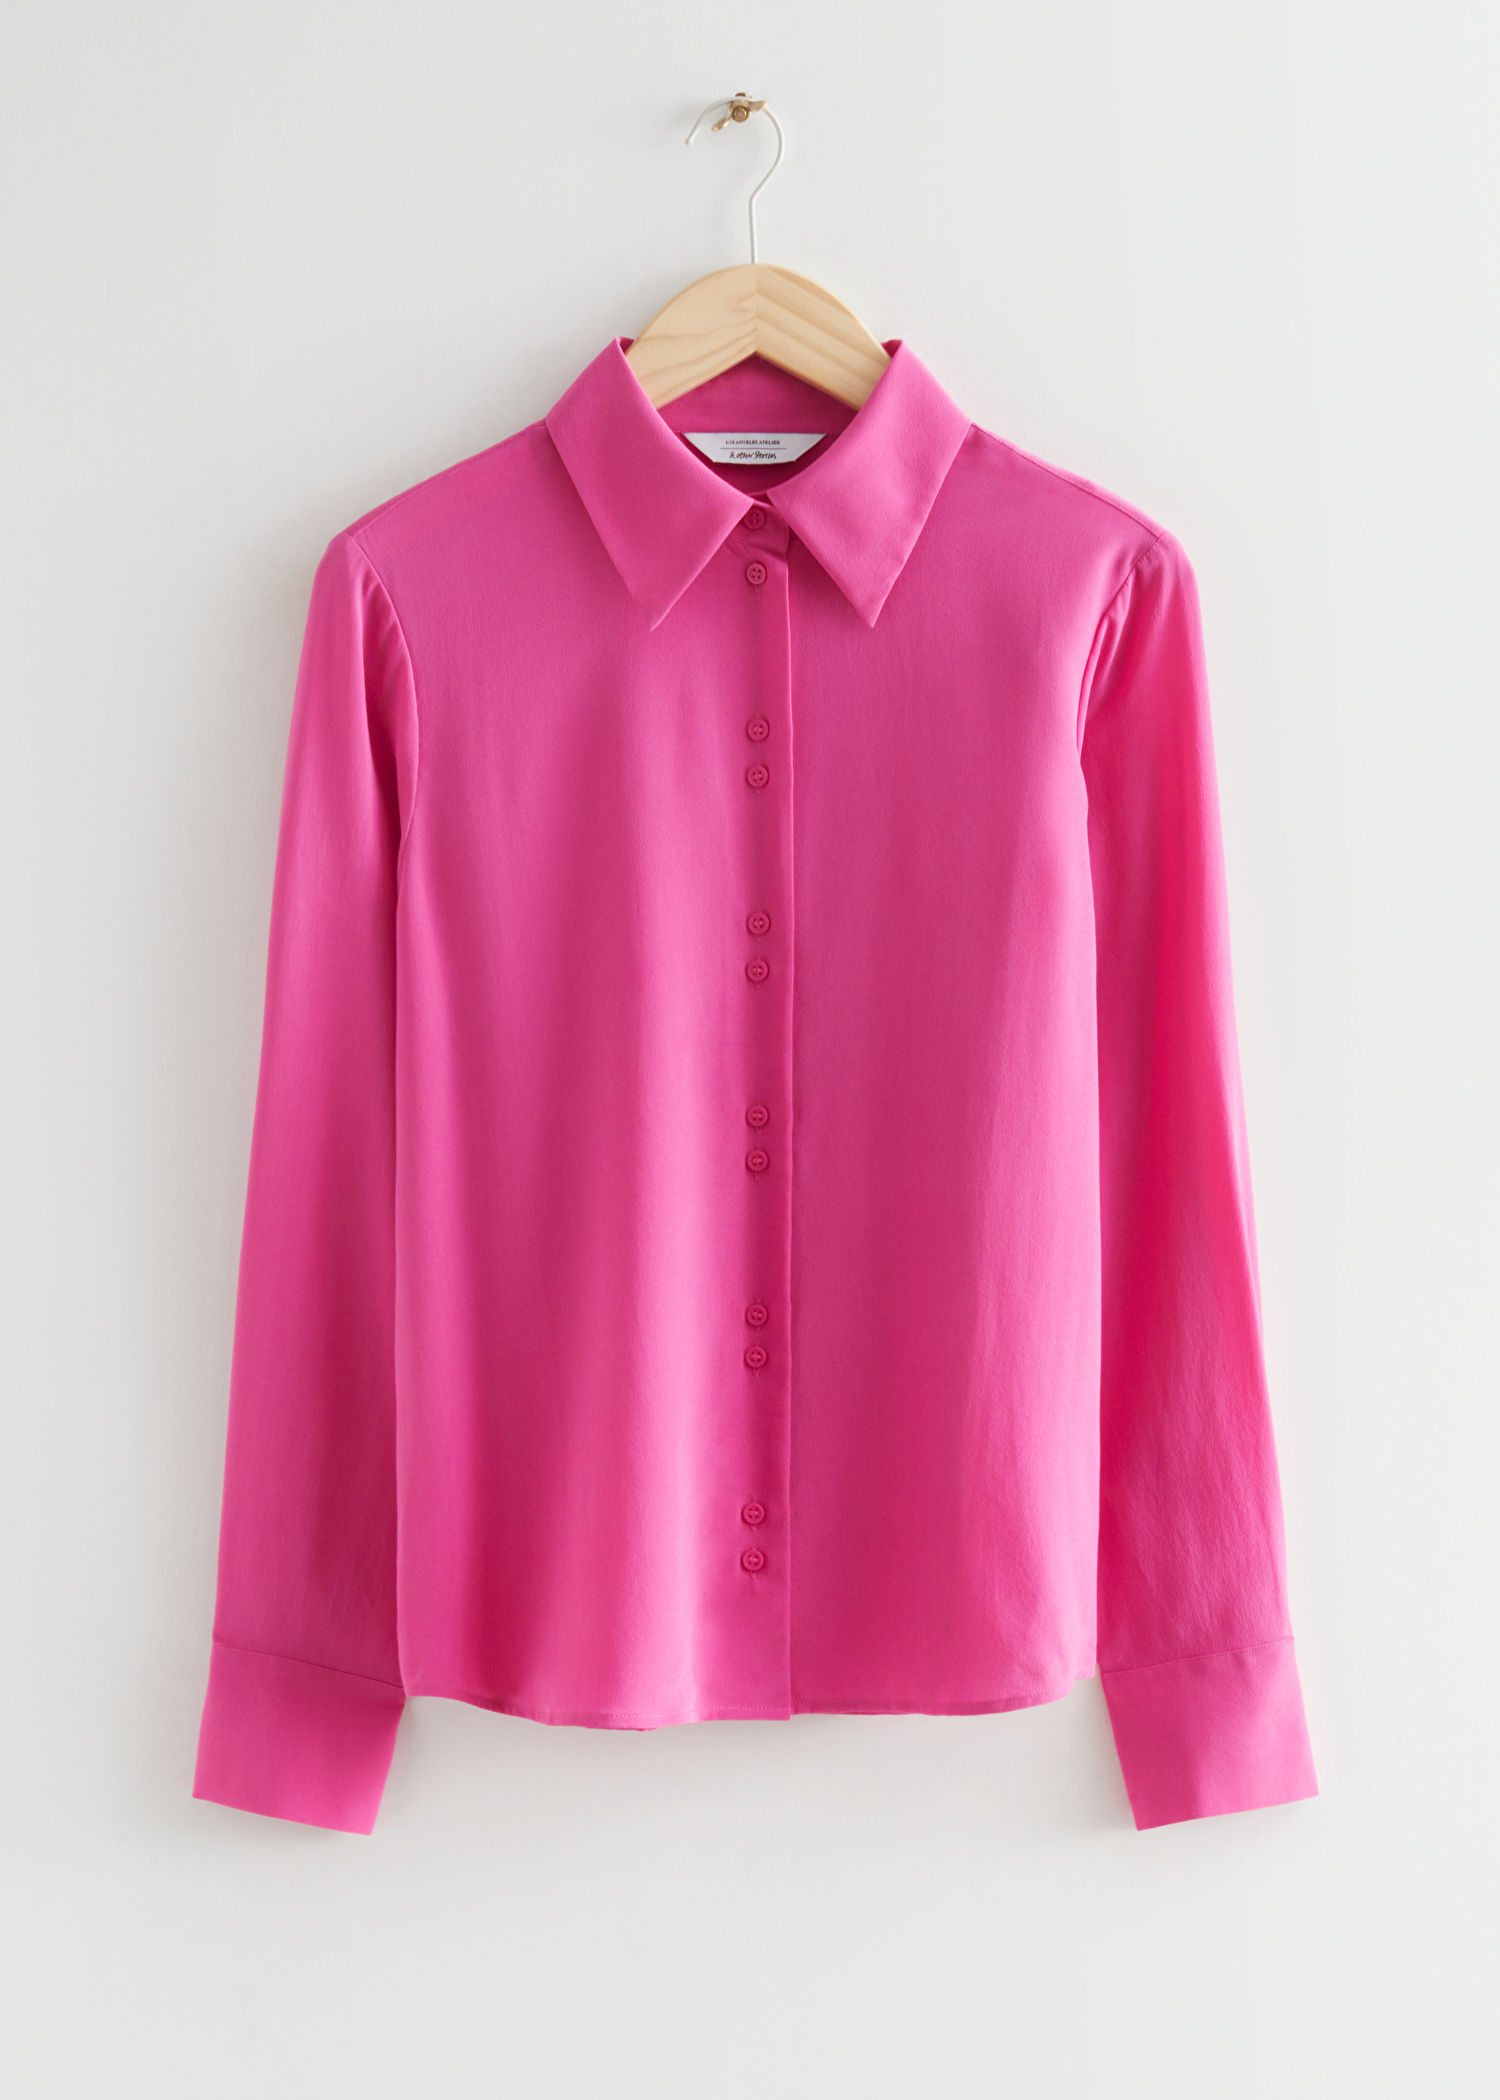 & Other Stories Shell Button Silk Blouse